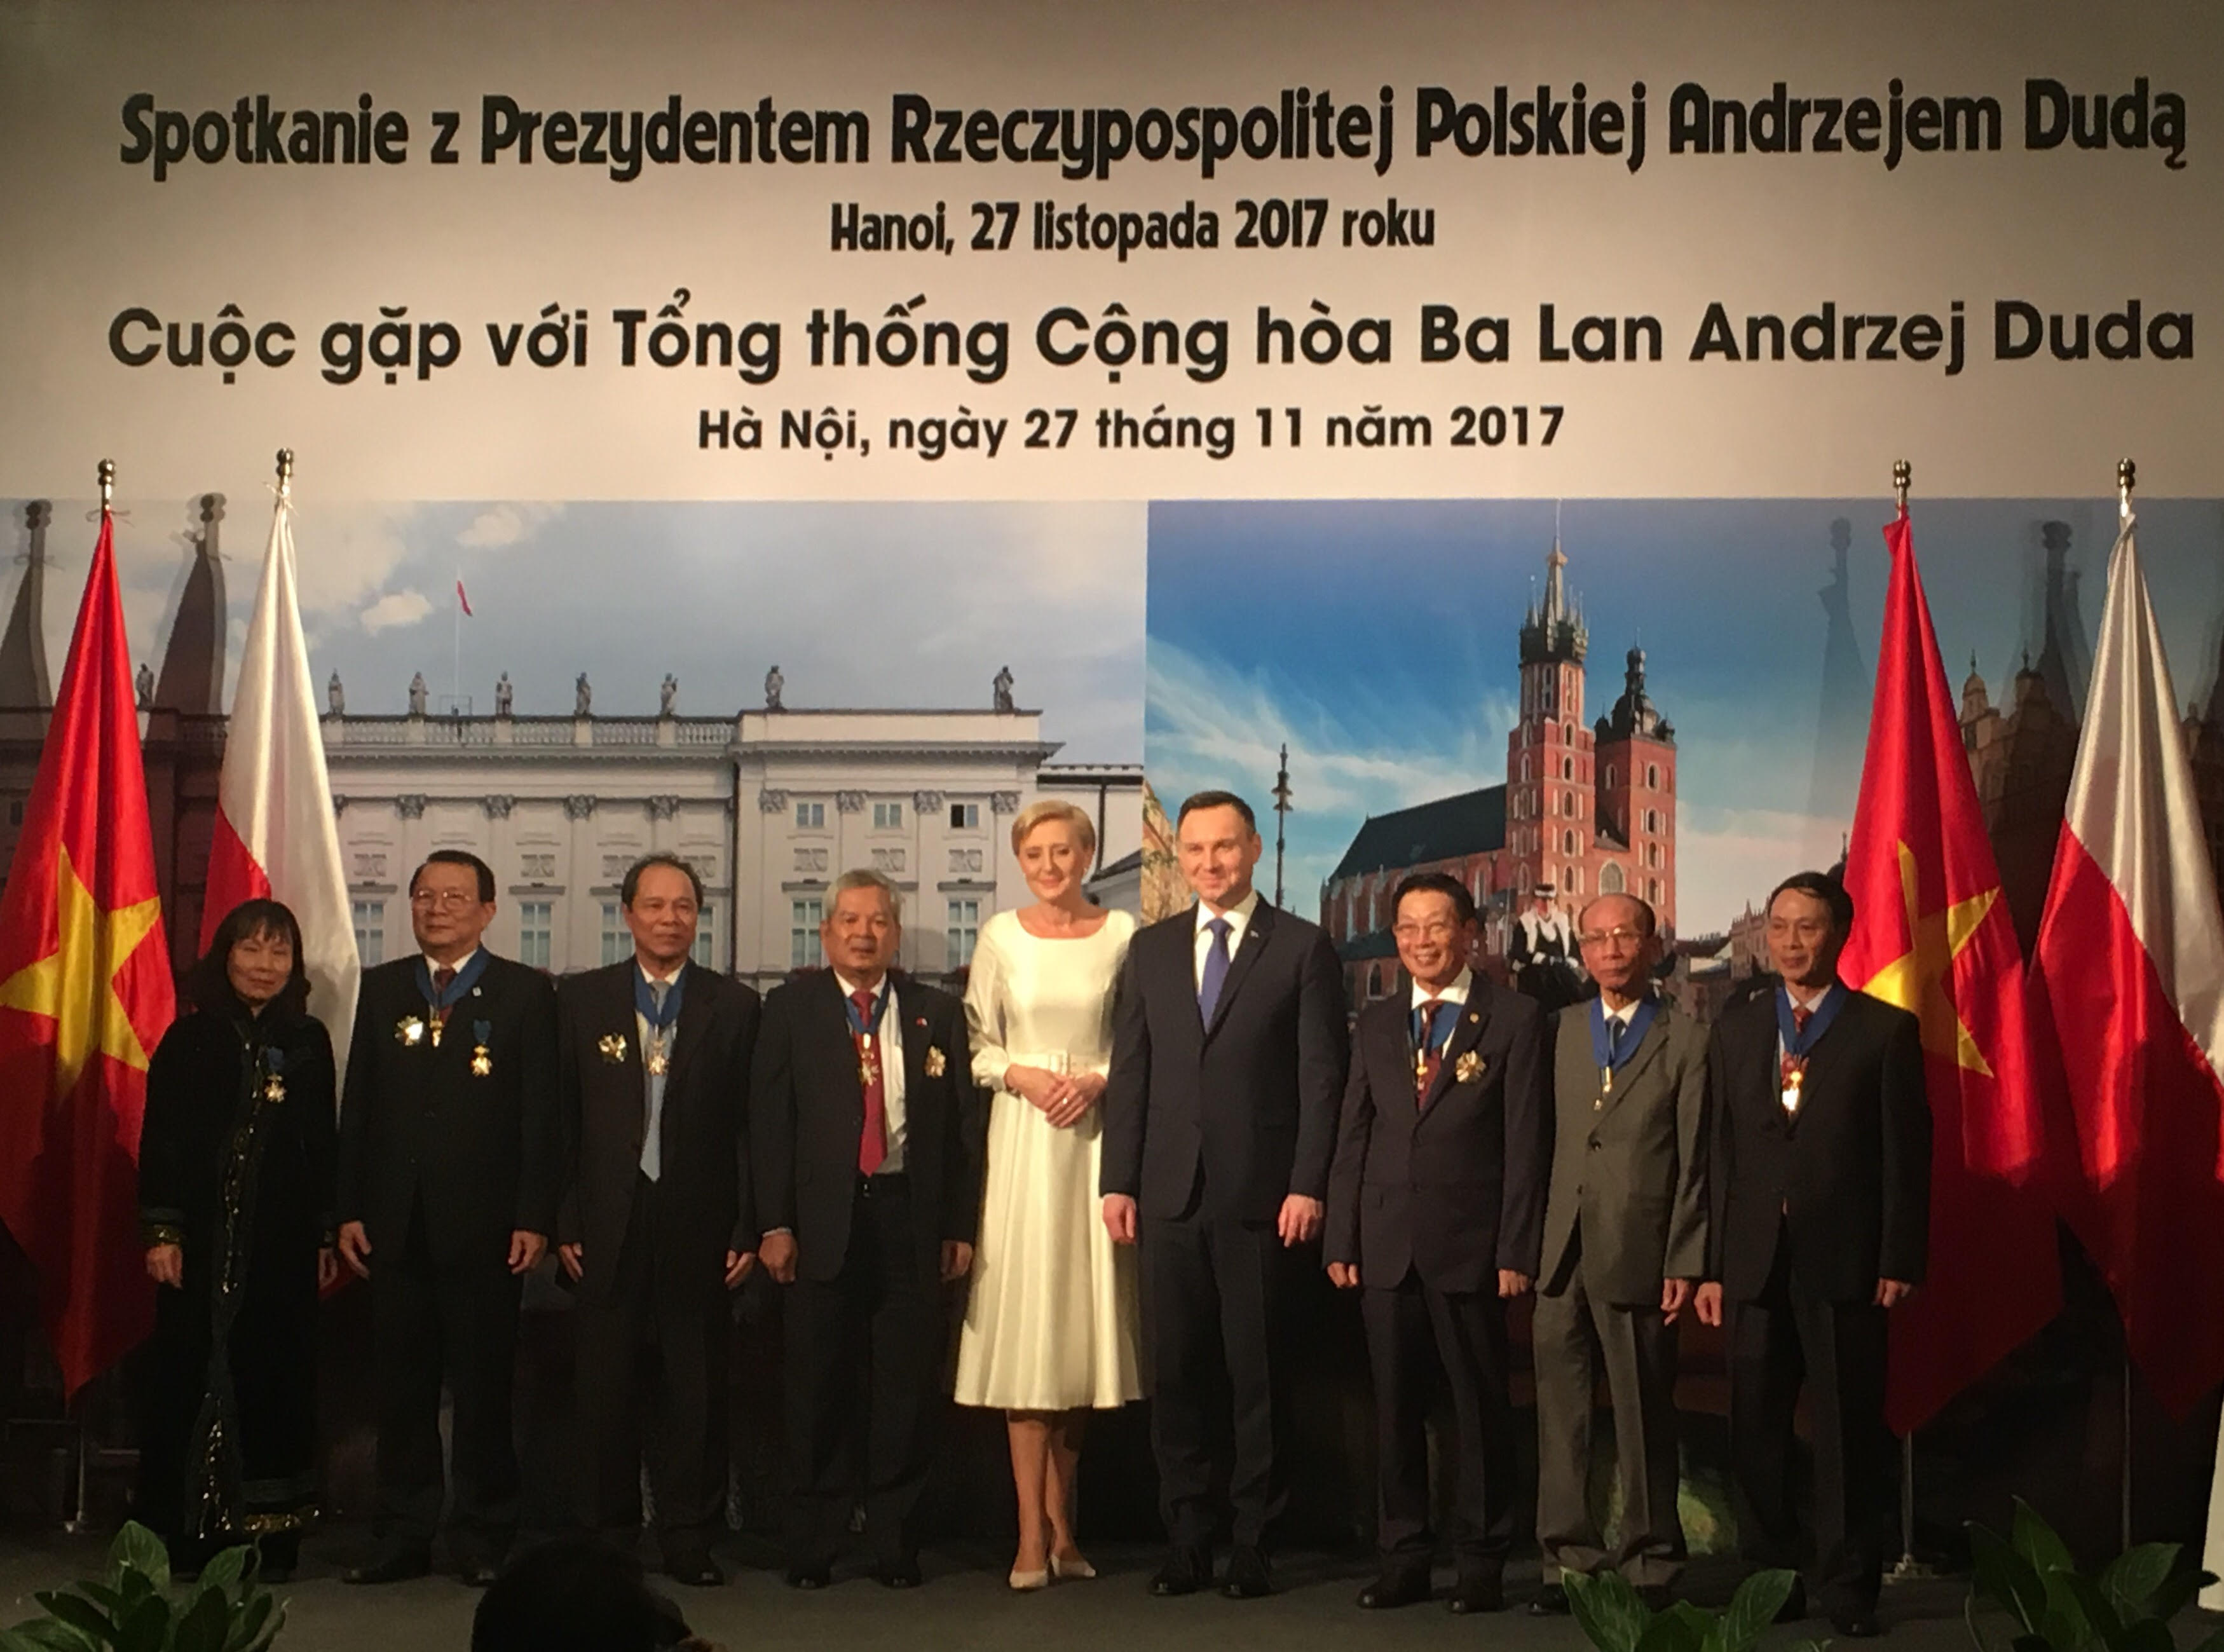 Poland reaching out to step up co-operation with Vietnam